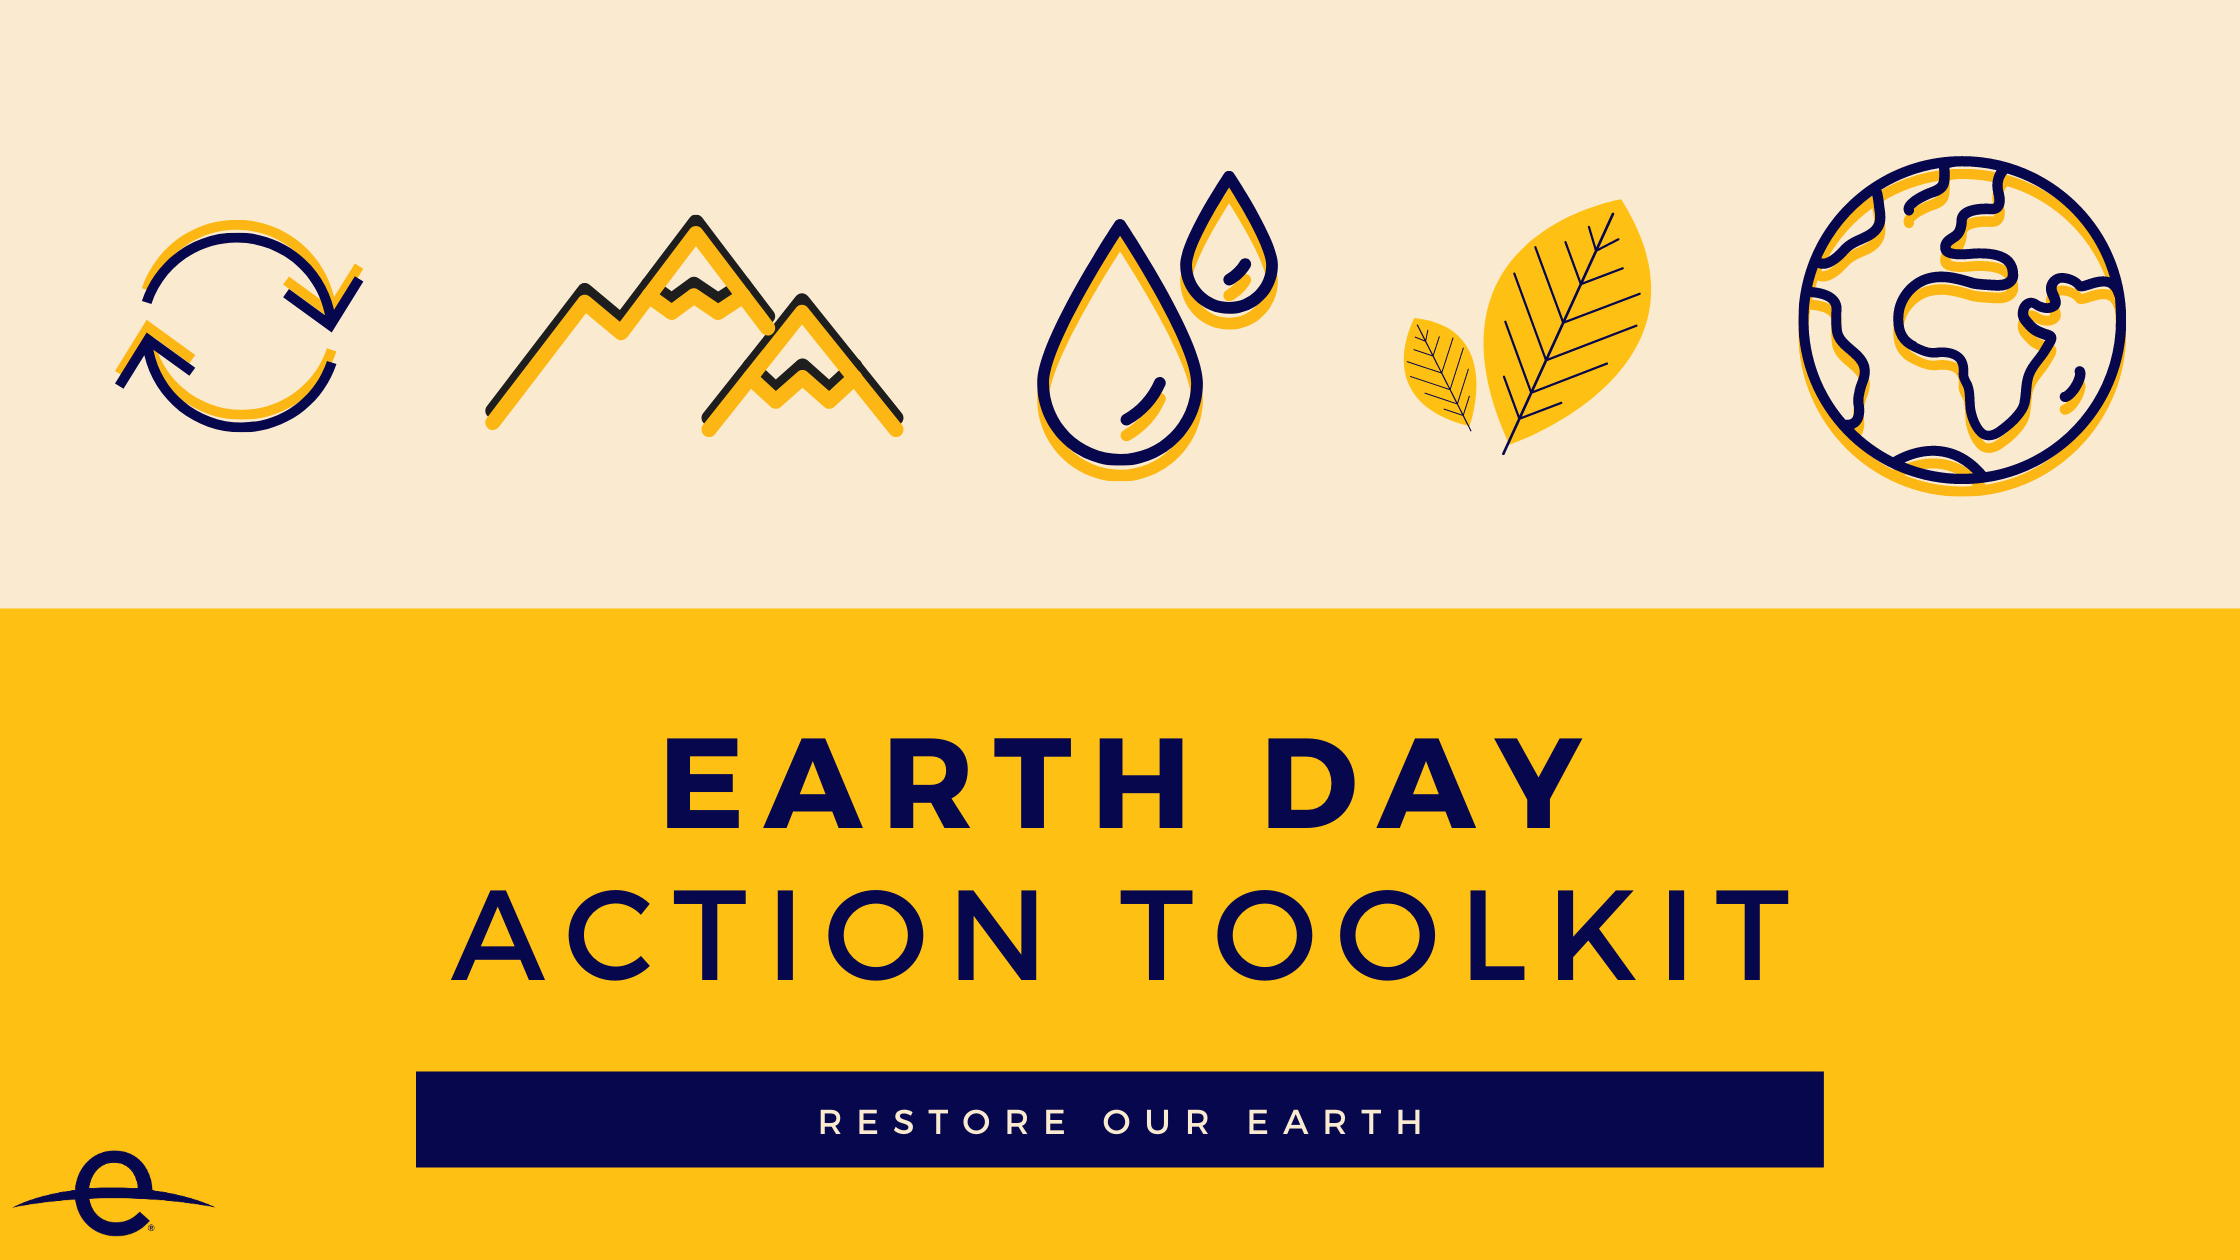 What can you do for Earth Day?